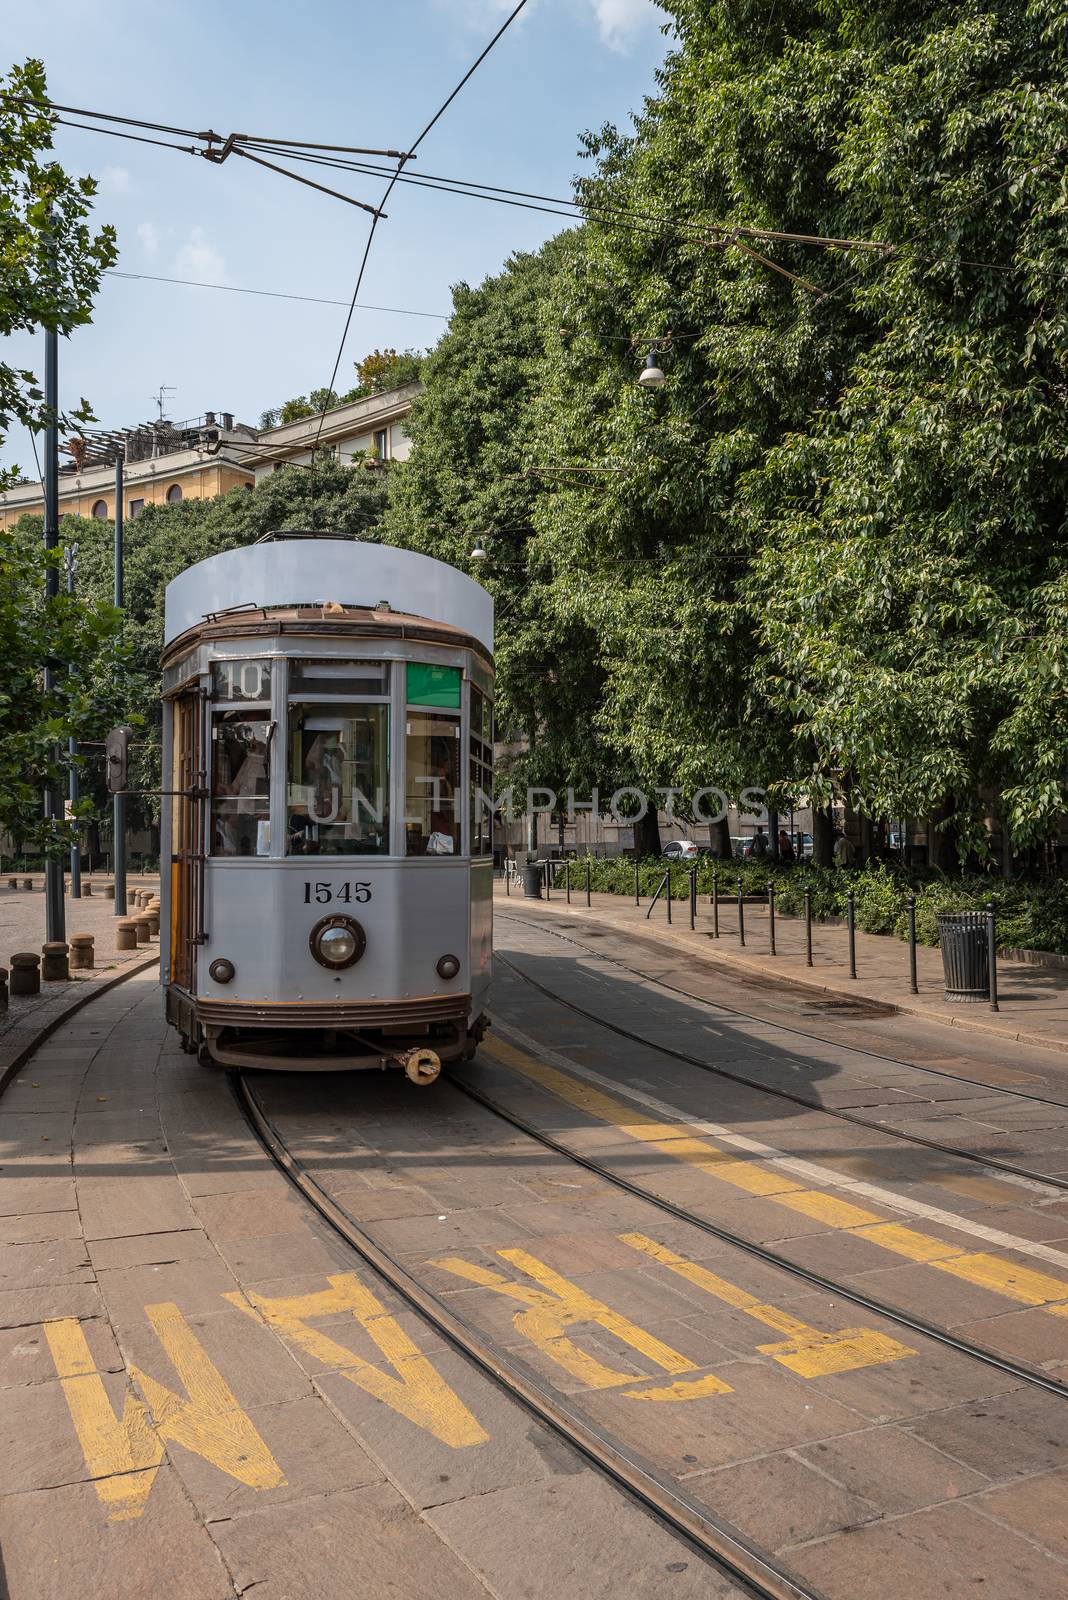 A tram travels in one of the streets of an Italian city, street photography in Milan